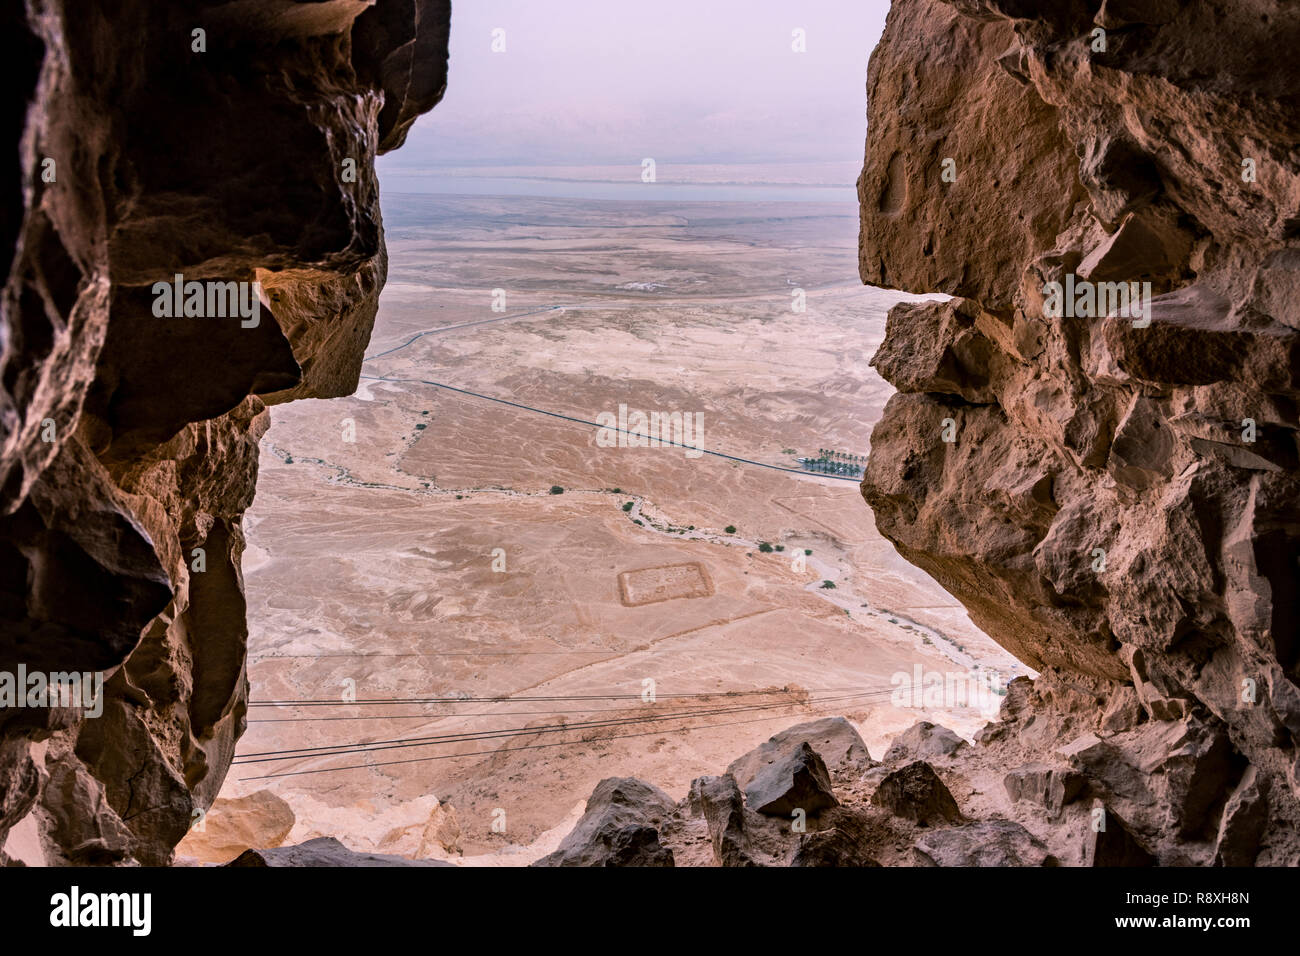 View from the Masada ruins of the Judean desert, the Dead Sea and then Jordanian territory. Marked on the ground one of the Roman siege camps.Israel. Stock Photo